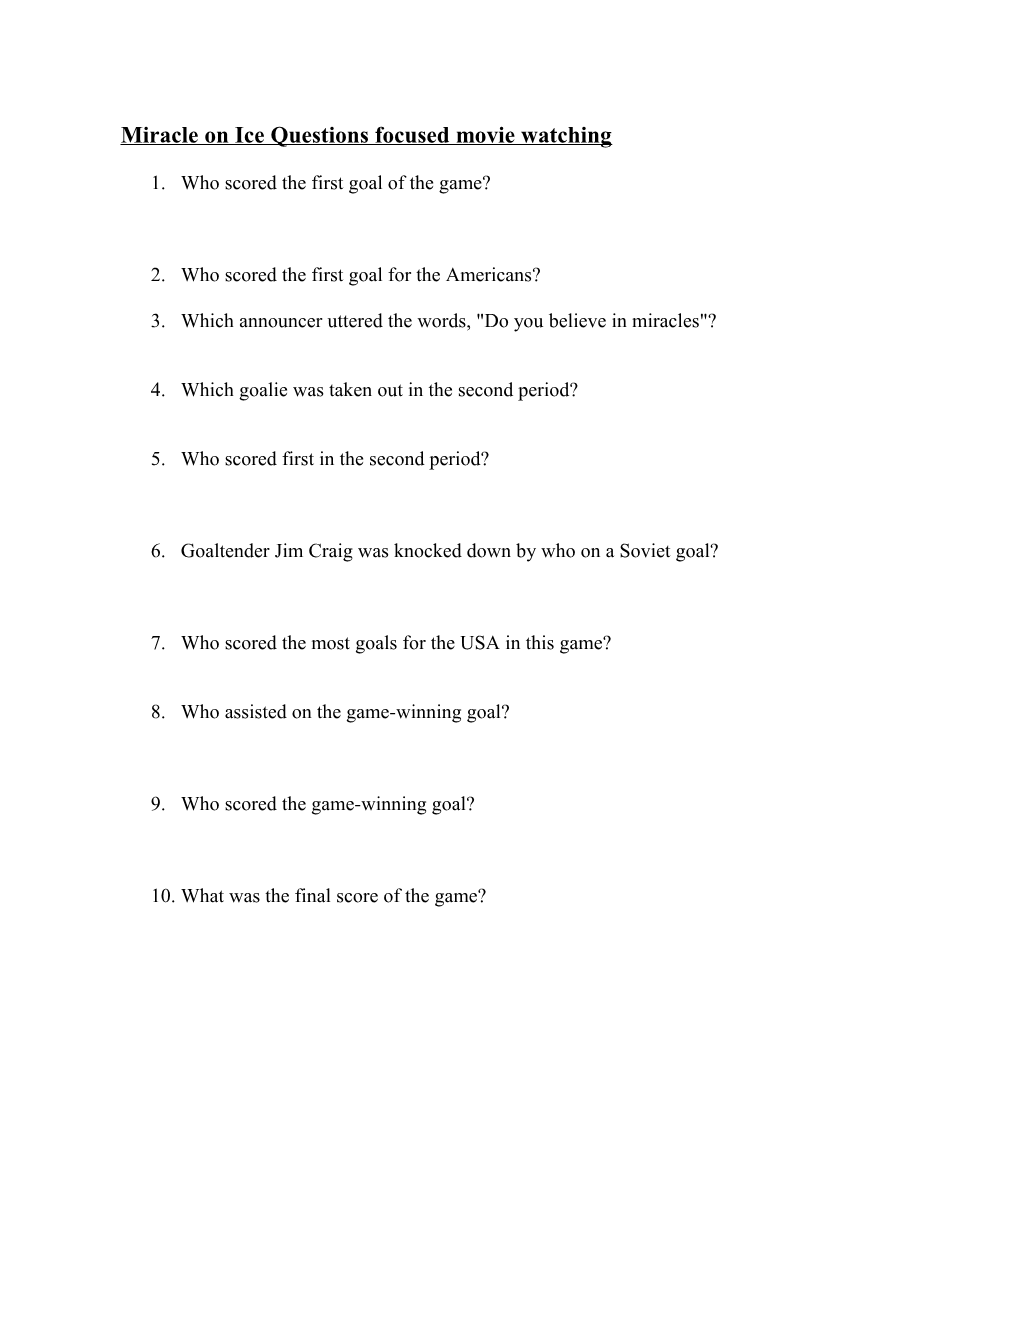 Miracle on Ice Questions Focused Movie Watching